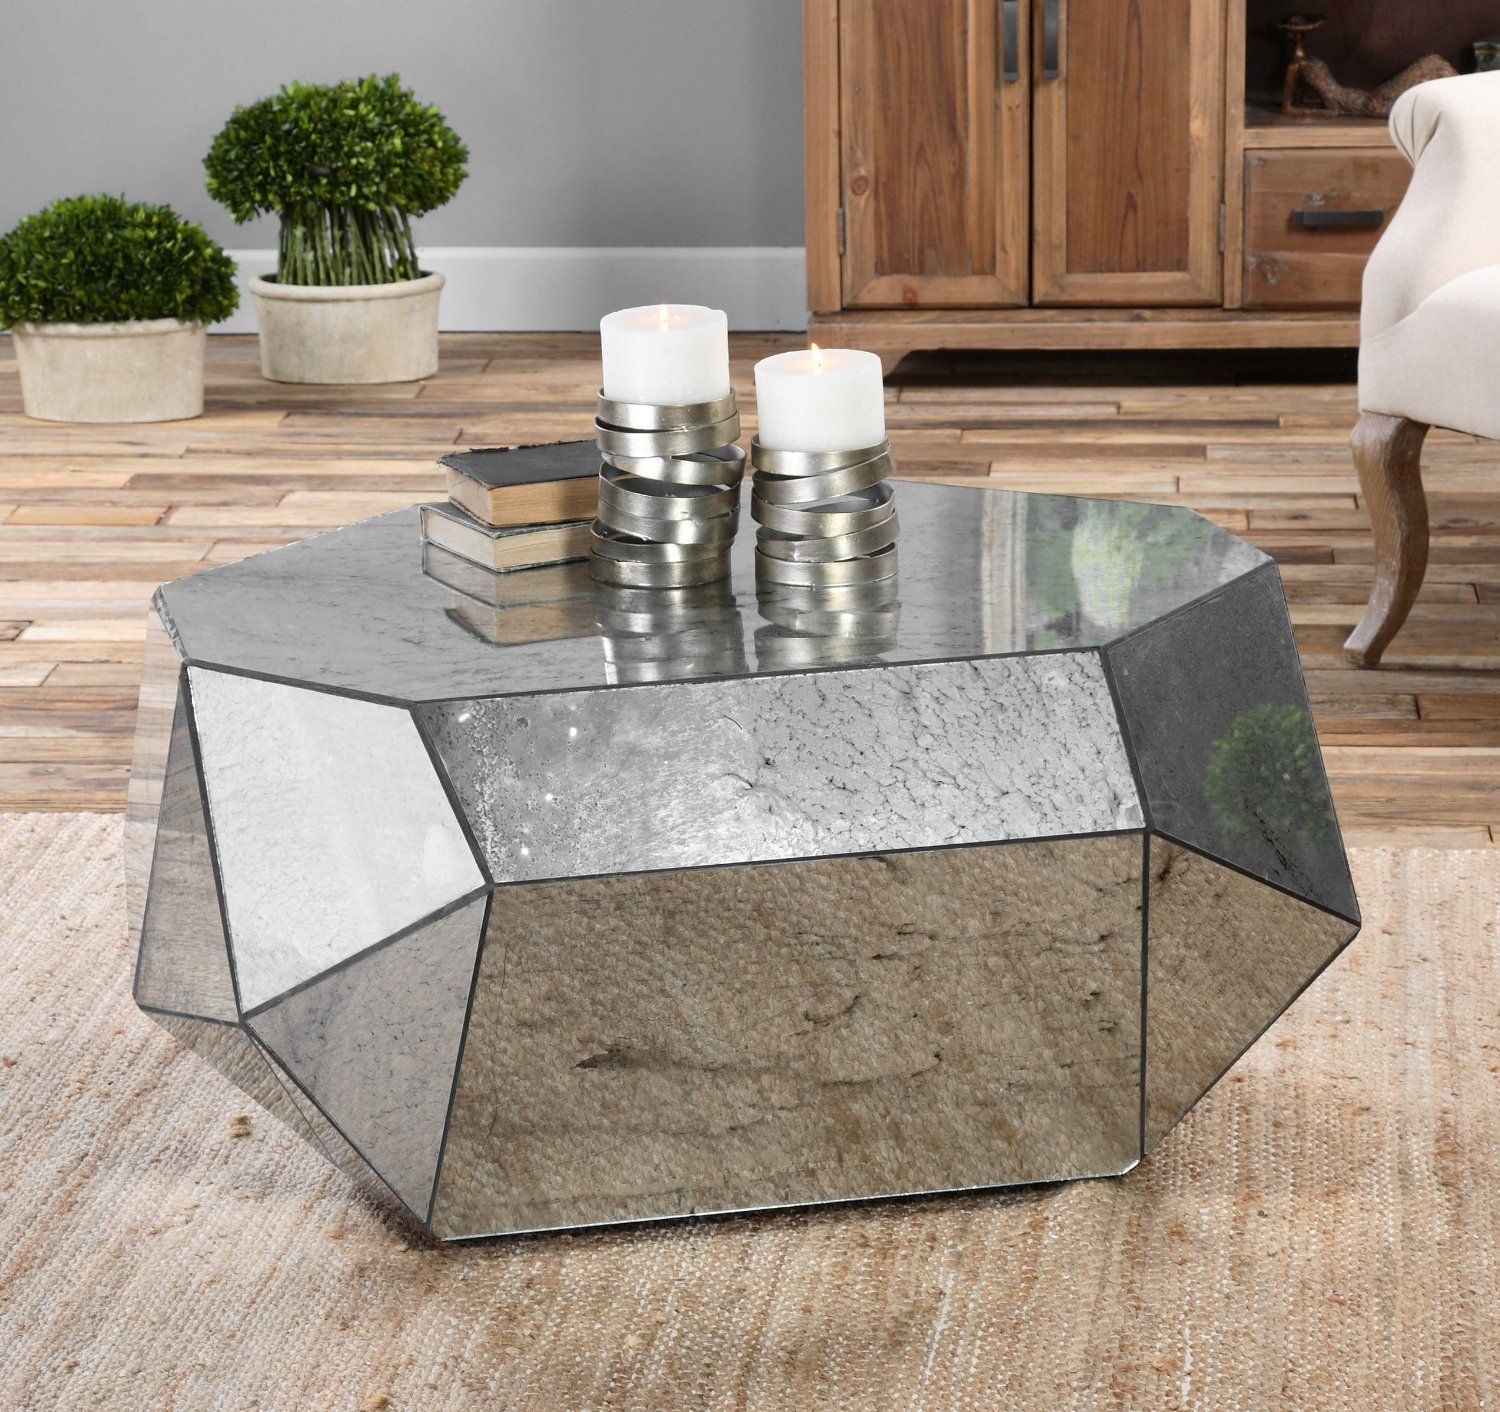 9 Geometric Coffee Tables To Perfectly Align Your Life Throughout Modern Geometric Coffee Tables (View 2 of 20)